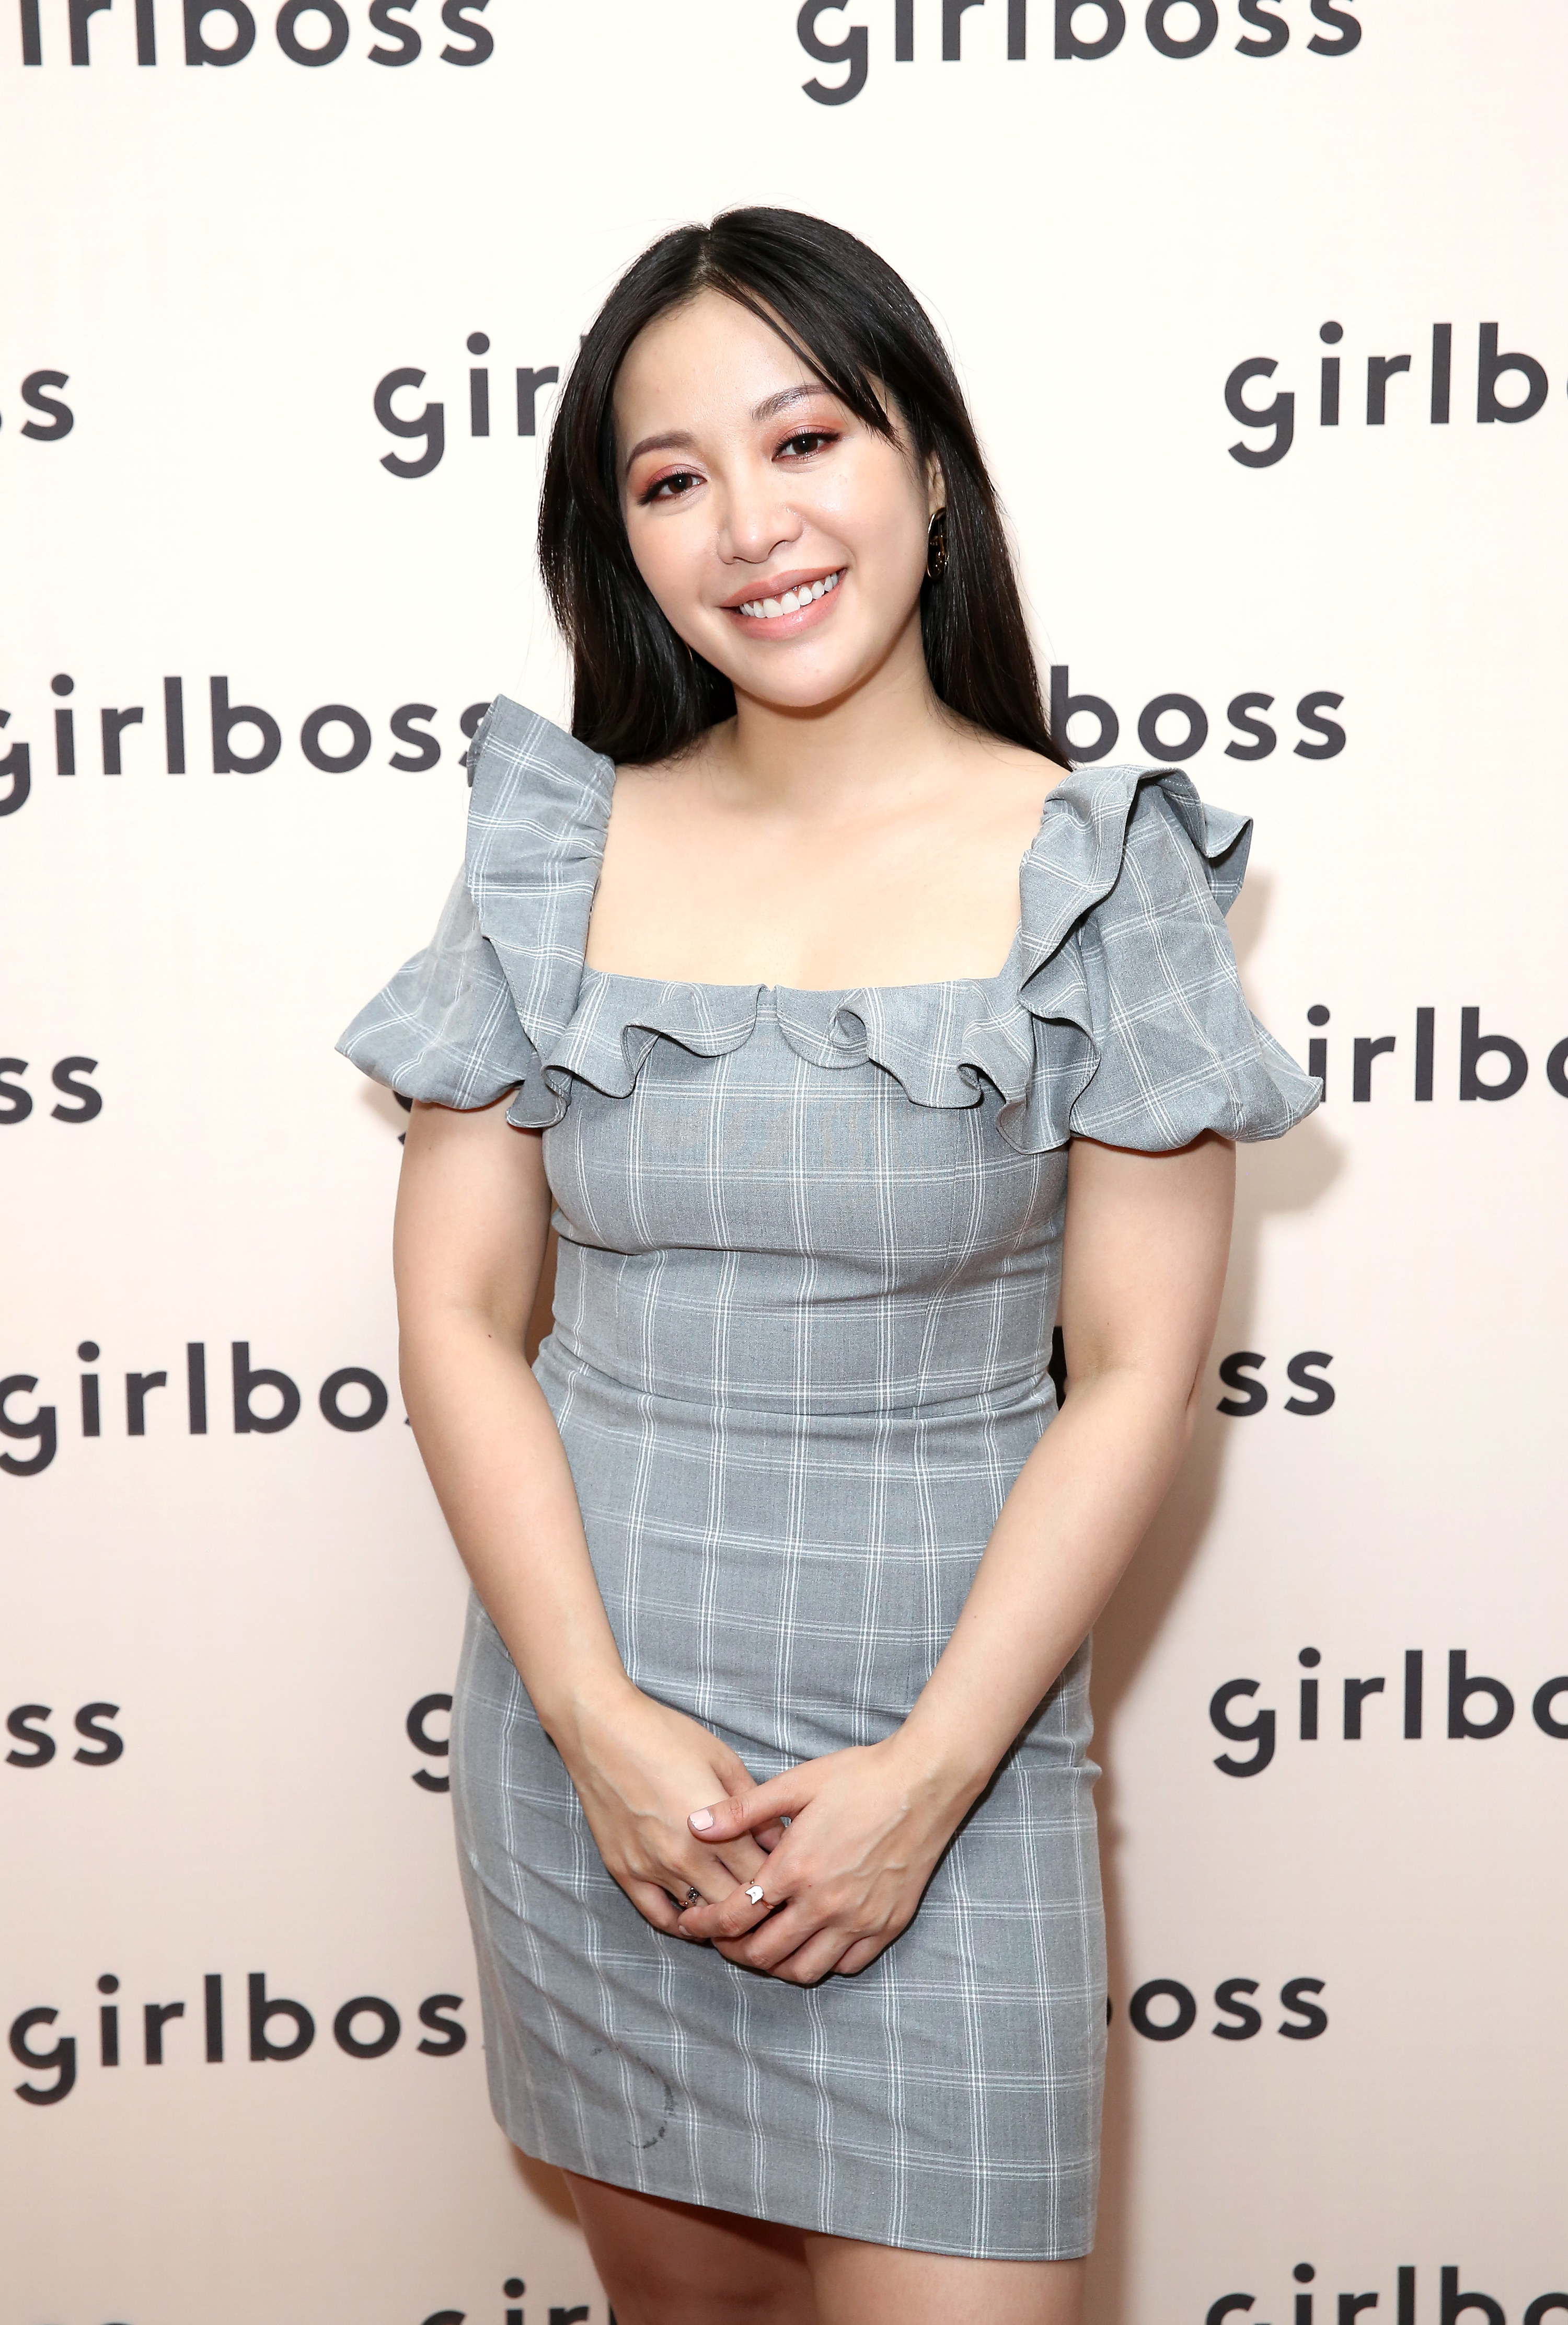 Michelle Phan at the 2019 Girlboss Rally in Los Angeles, California